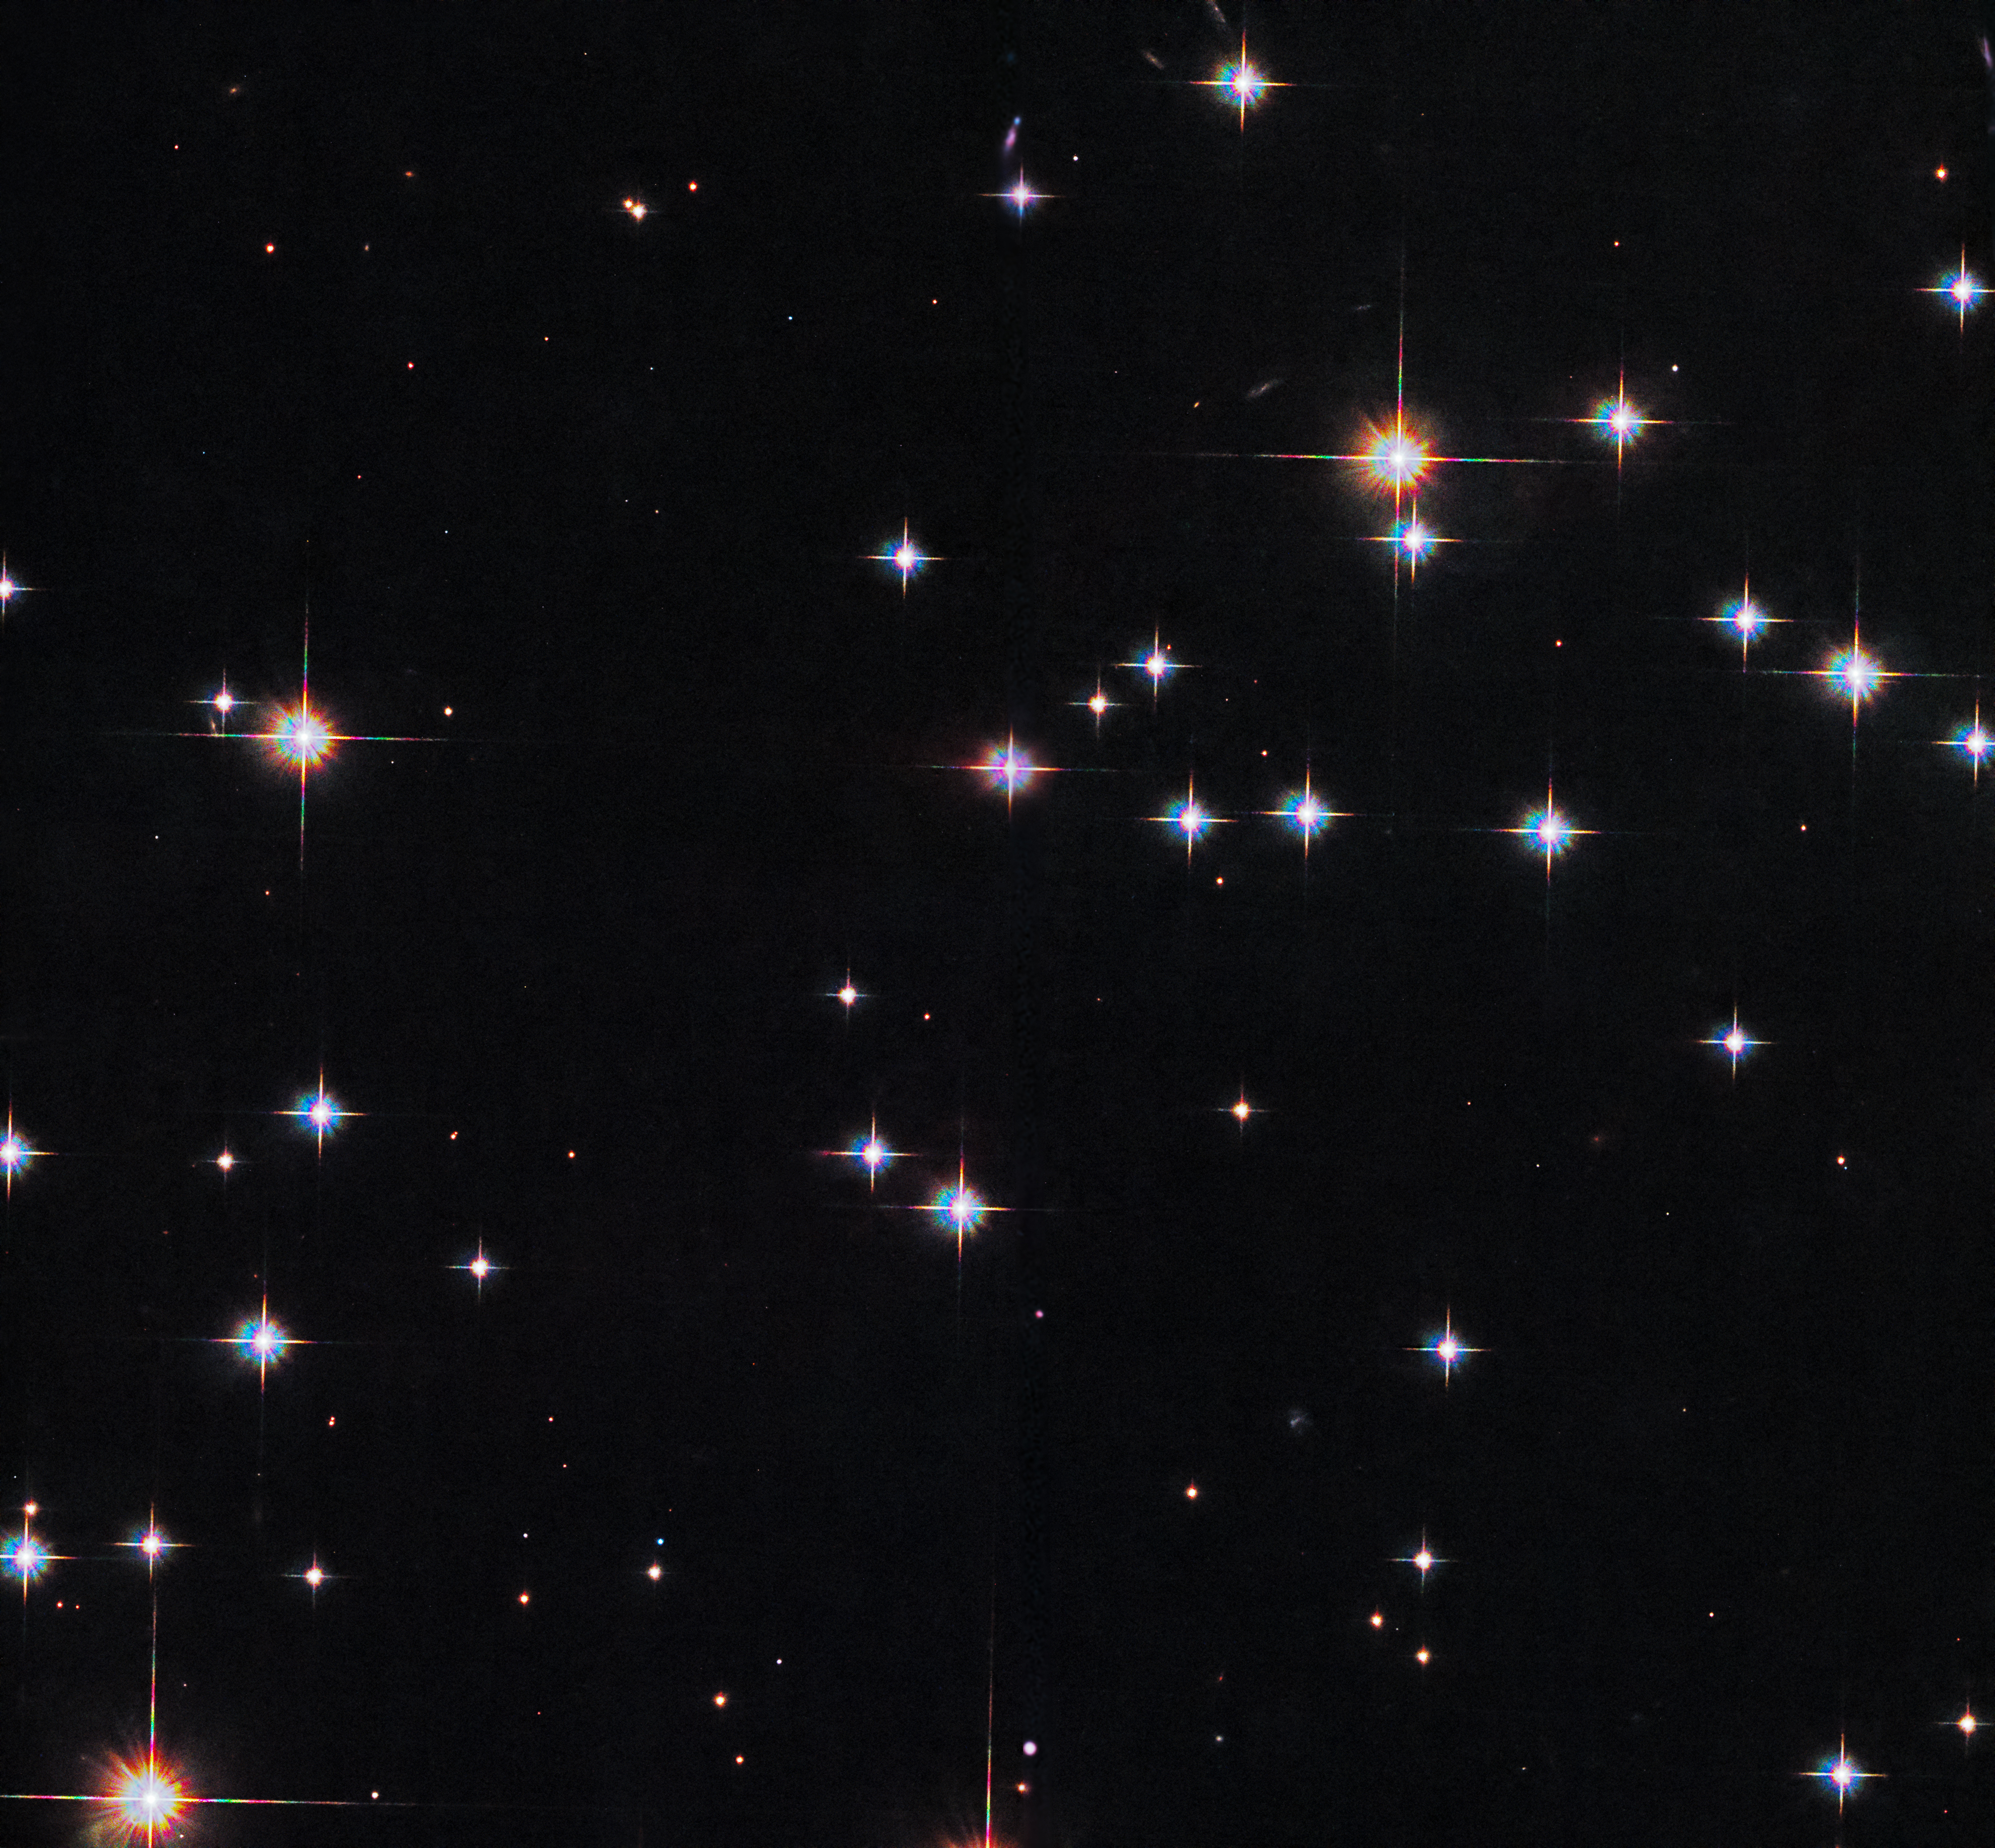 A scattering of white and reddish stars on a black background.